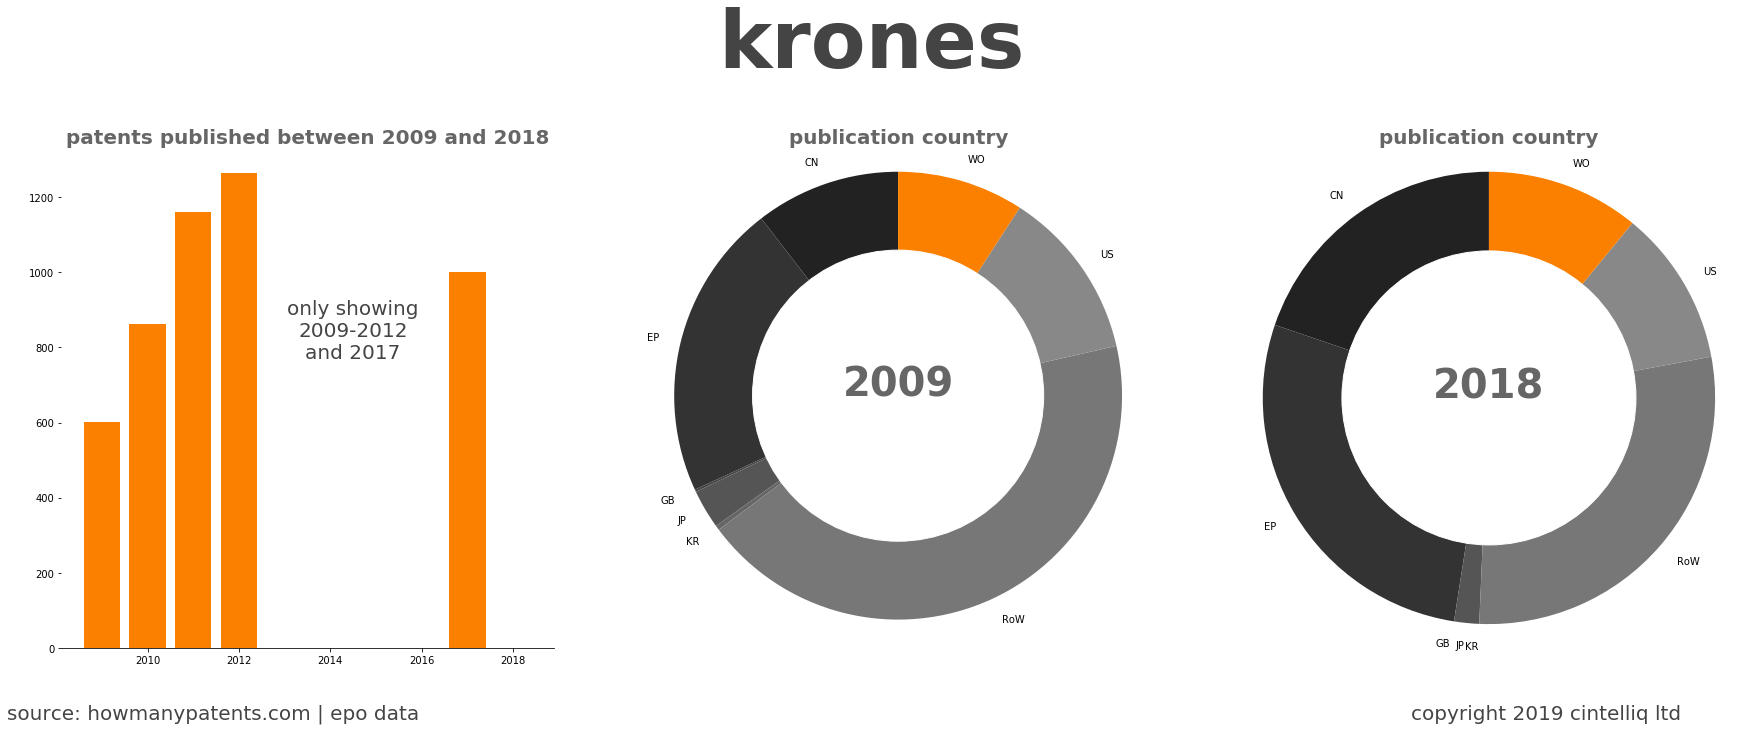 summary of patents for Krones